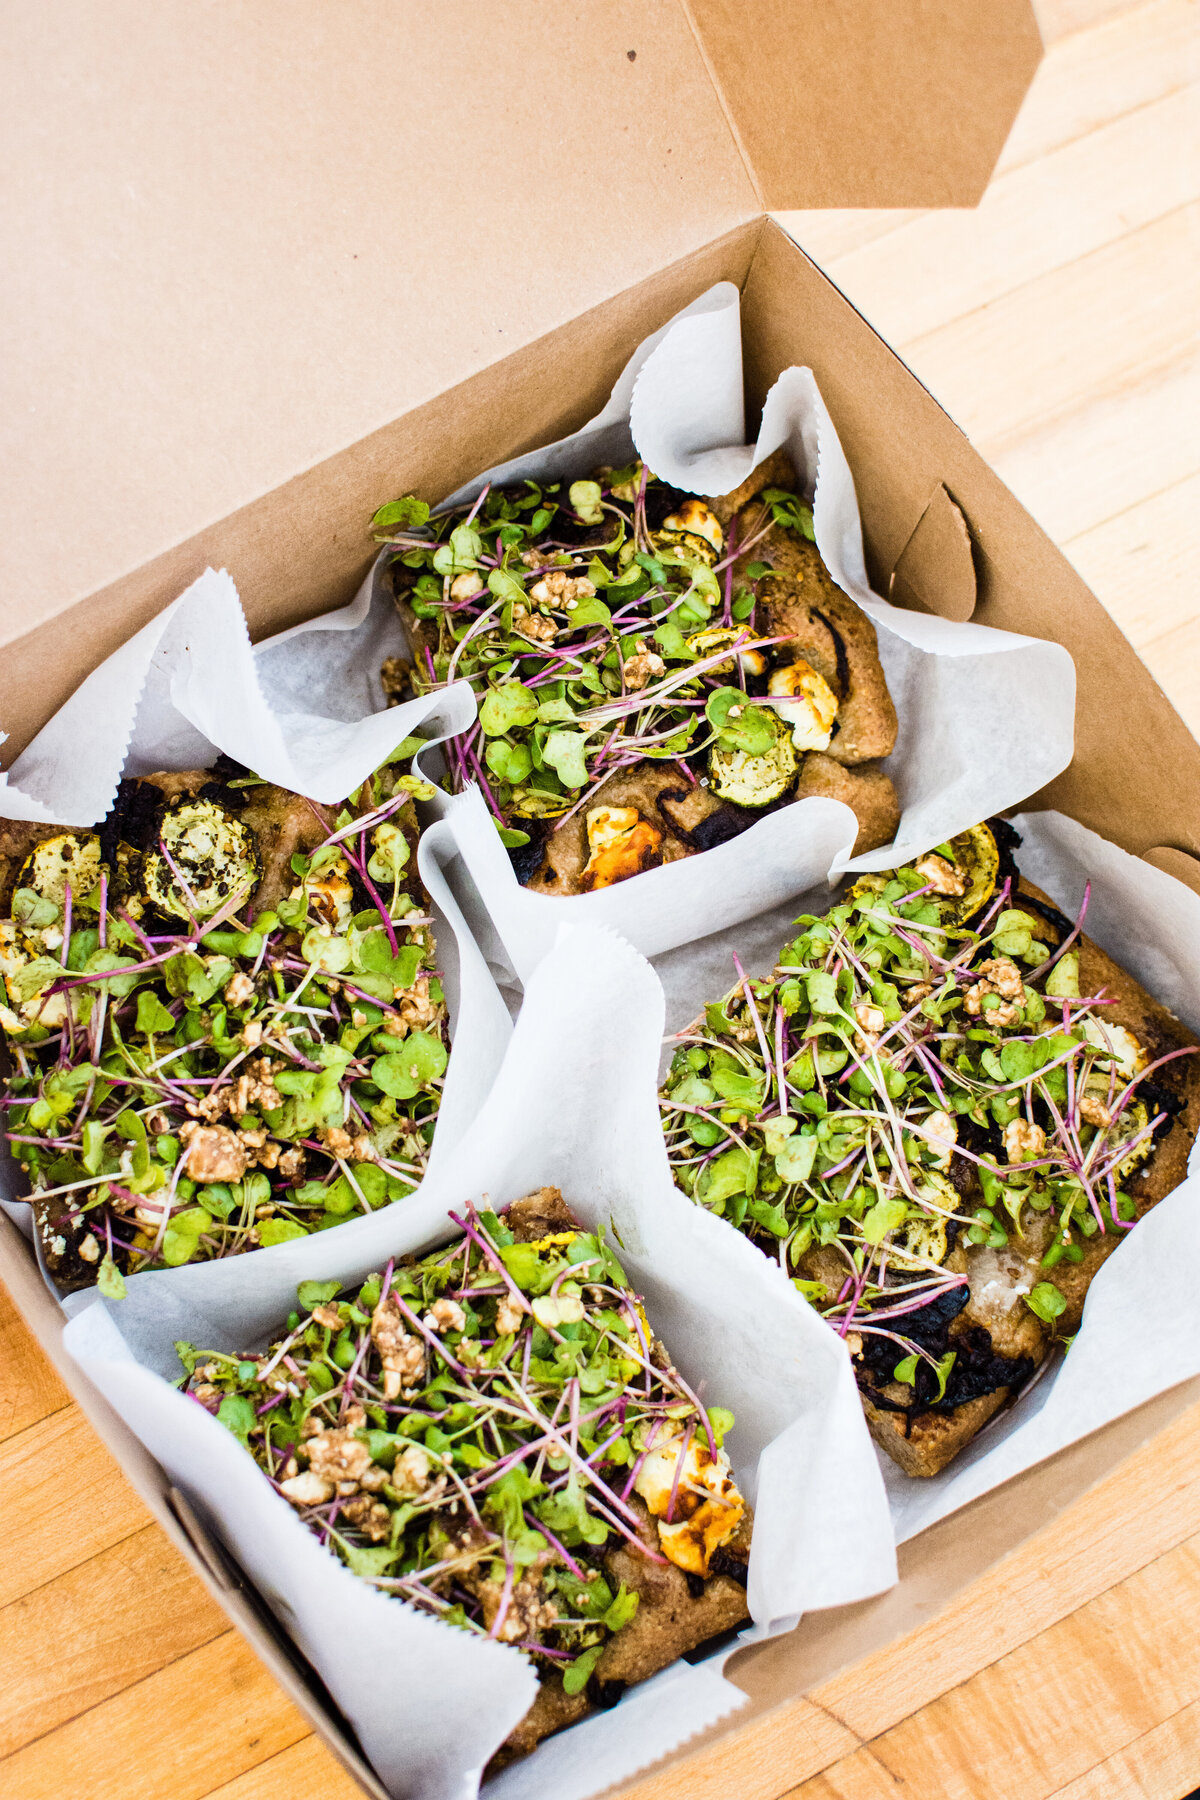 Focaccia with savory toppings and micro greens tucked in parchment paper in a brown box